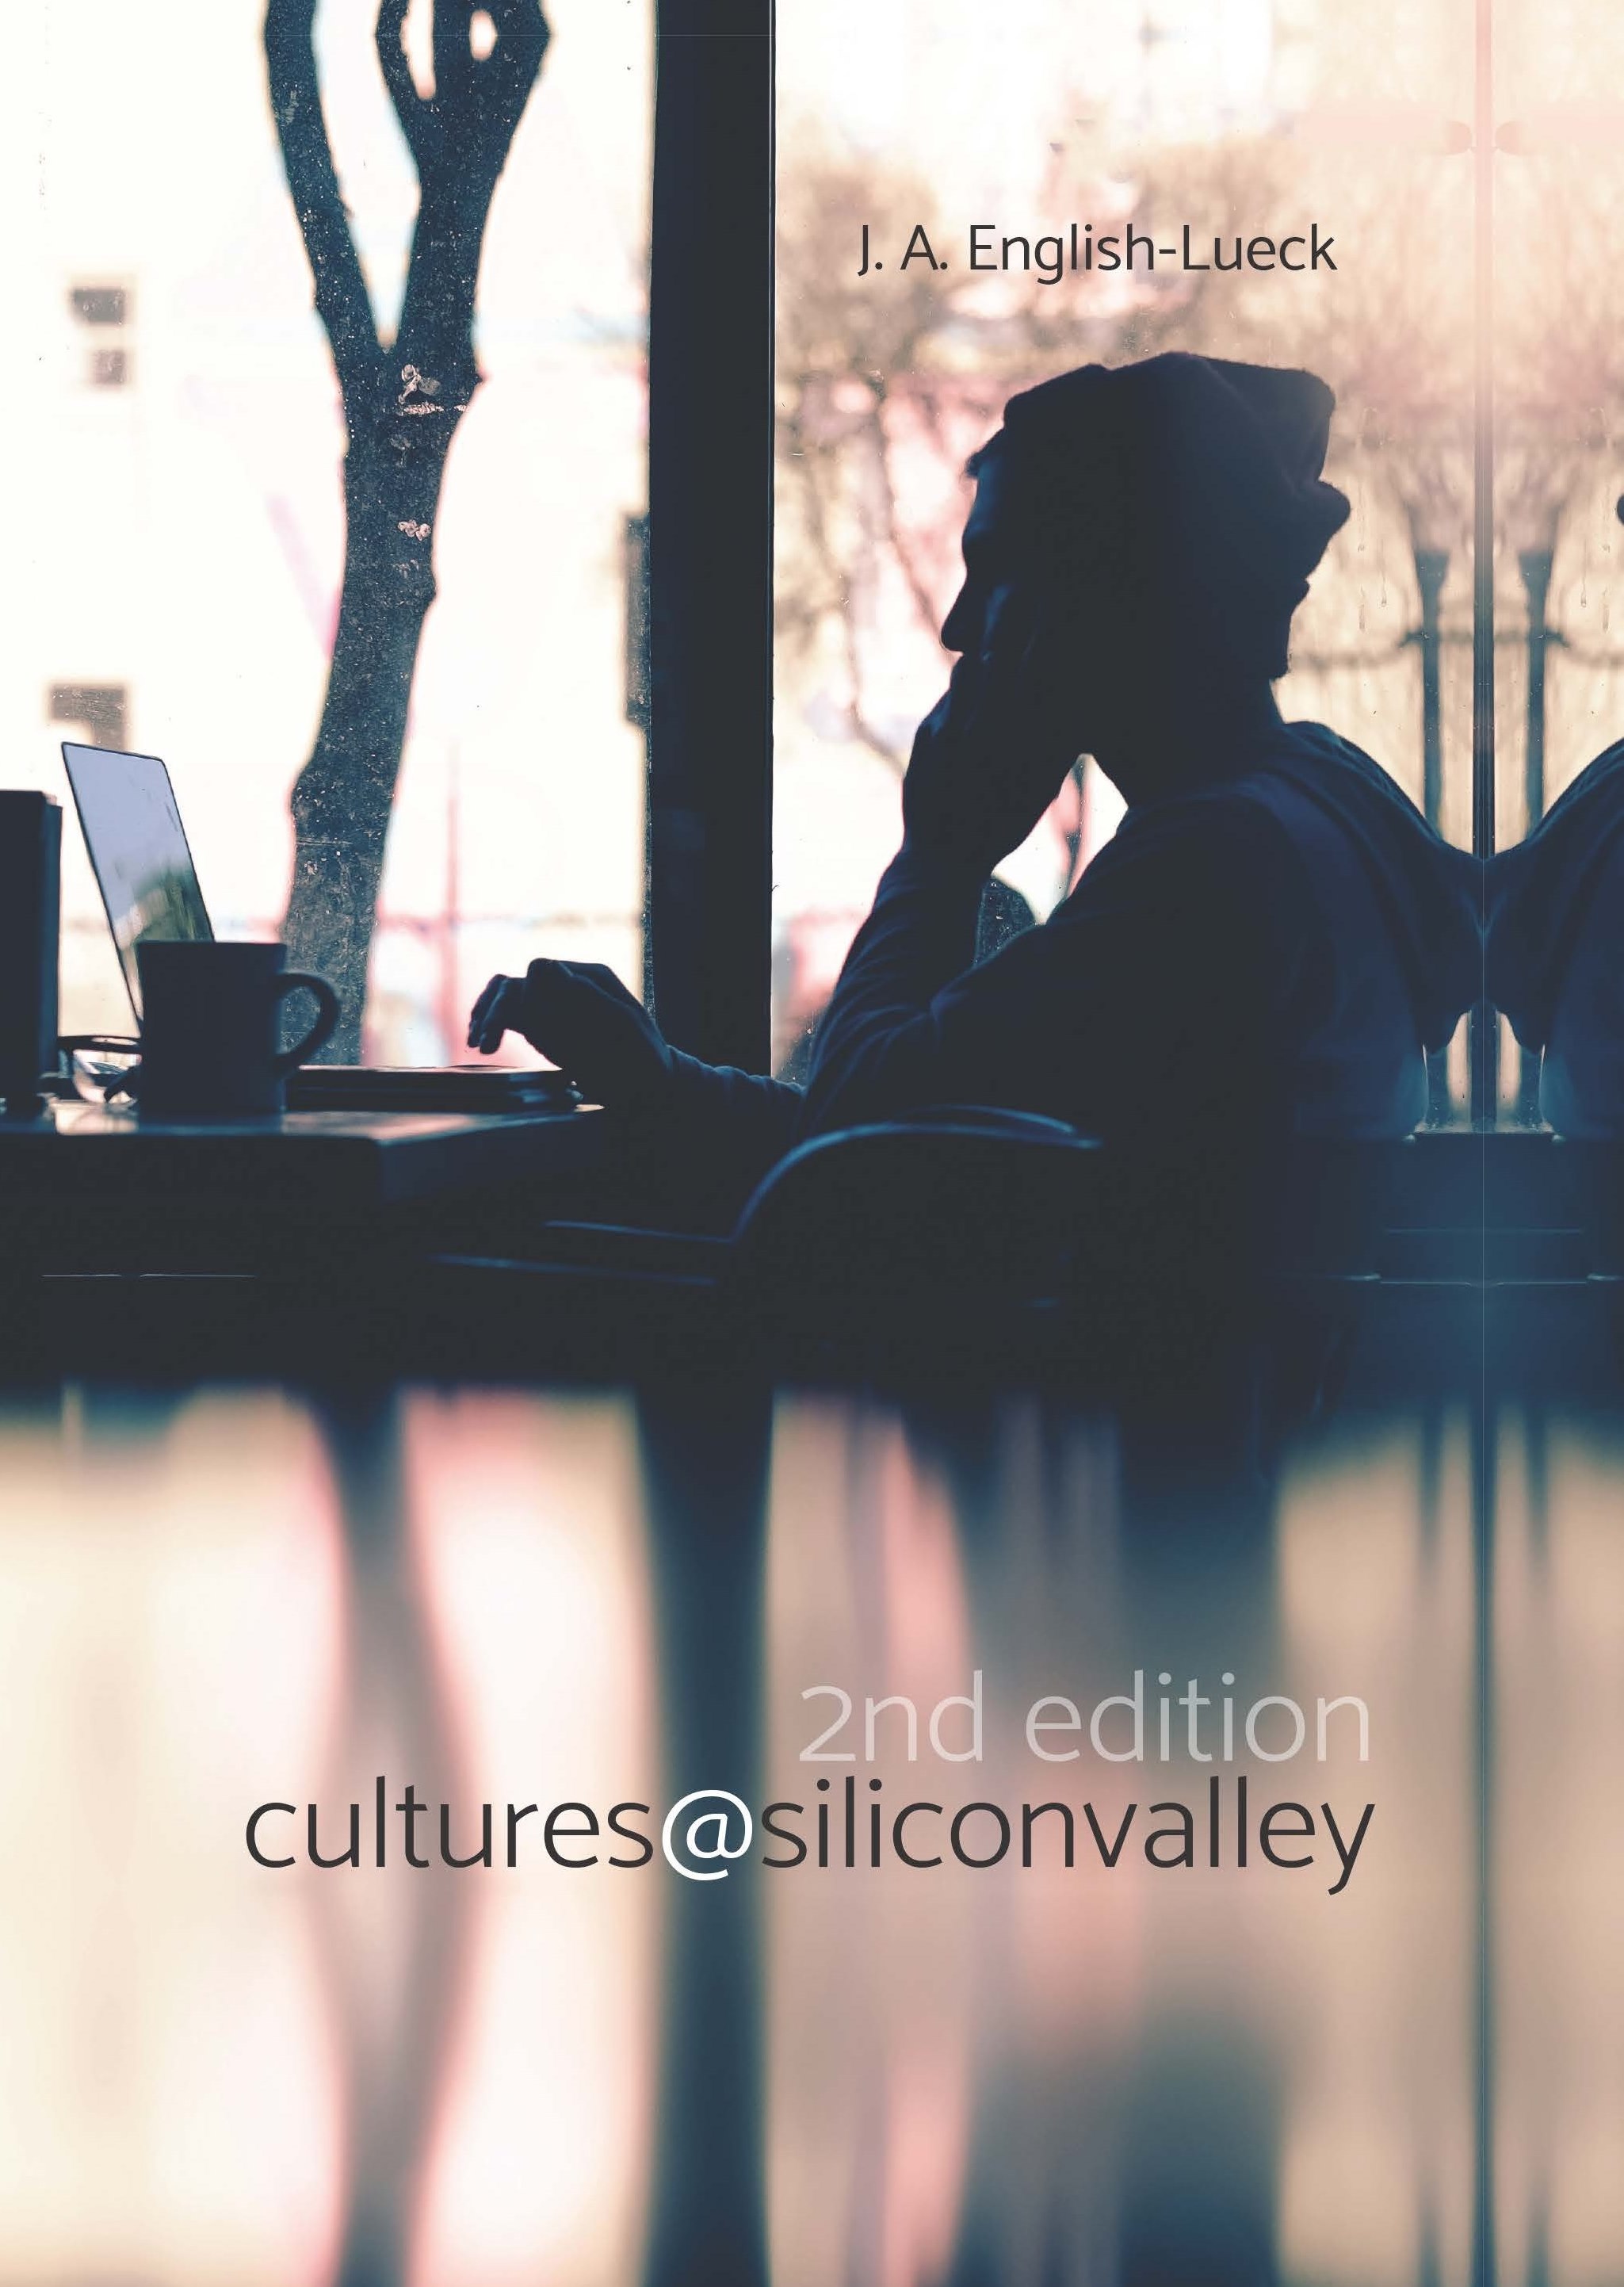 cultures@siliconvalley (2nd edition)